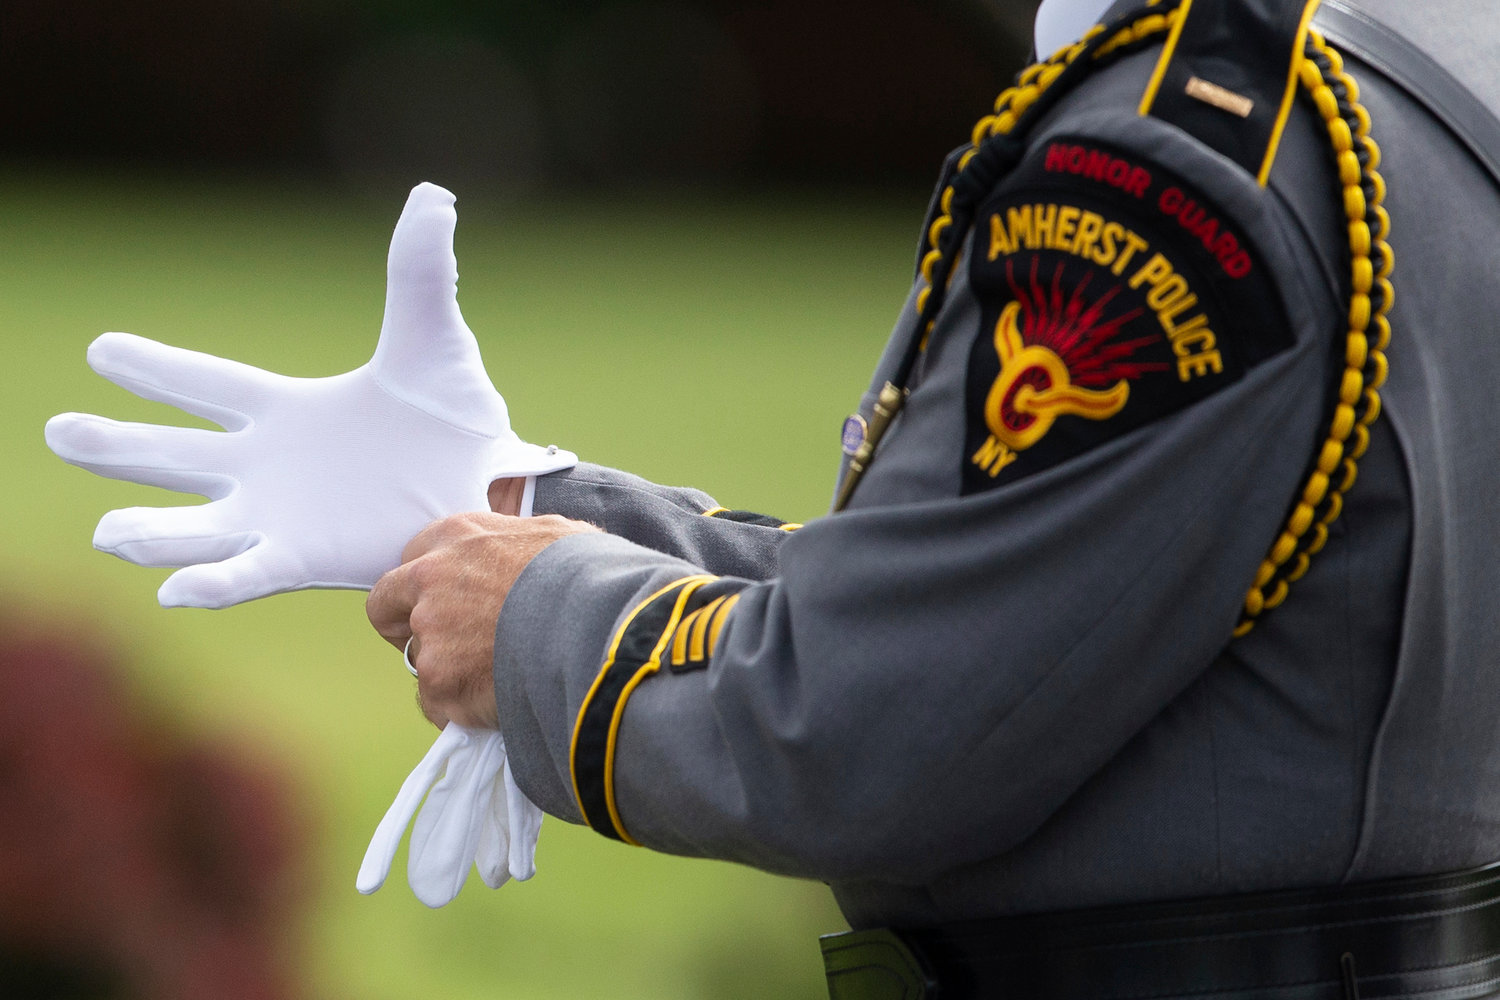 A member of the Amherst Police honor guard prepares before a funeral service for Aaron Salter Jr. at The Chapel on Wednesday, May 25, 2022, in Getzville, N.Y. Salter Jr. was killed in the Buffalo supermarket shooting on May 14. (AP Photo/Joshua Bessex)